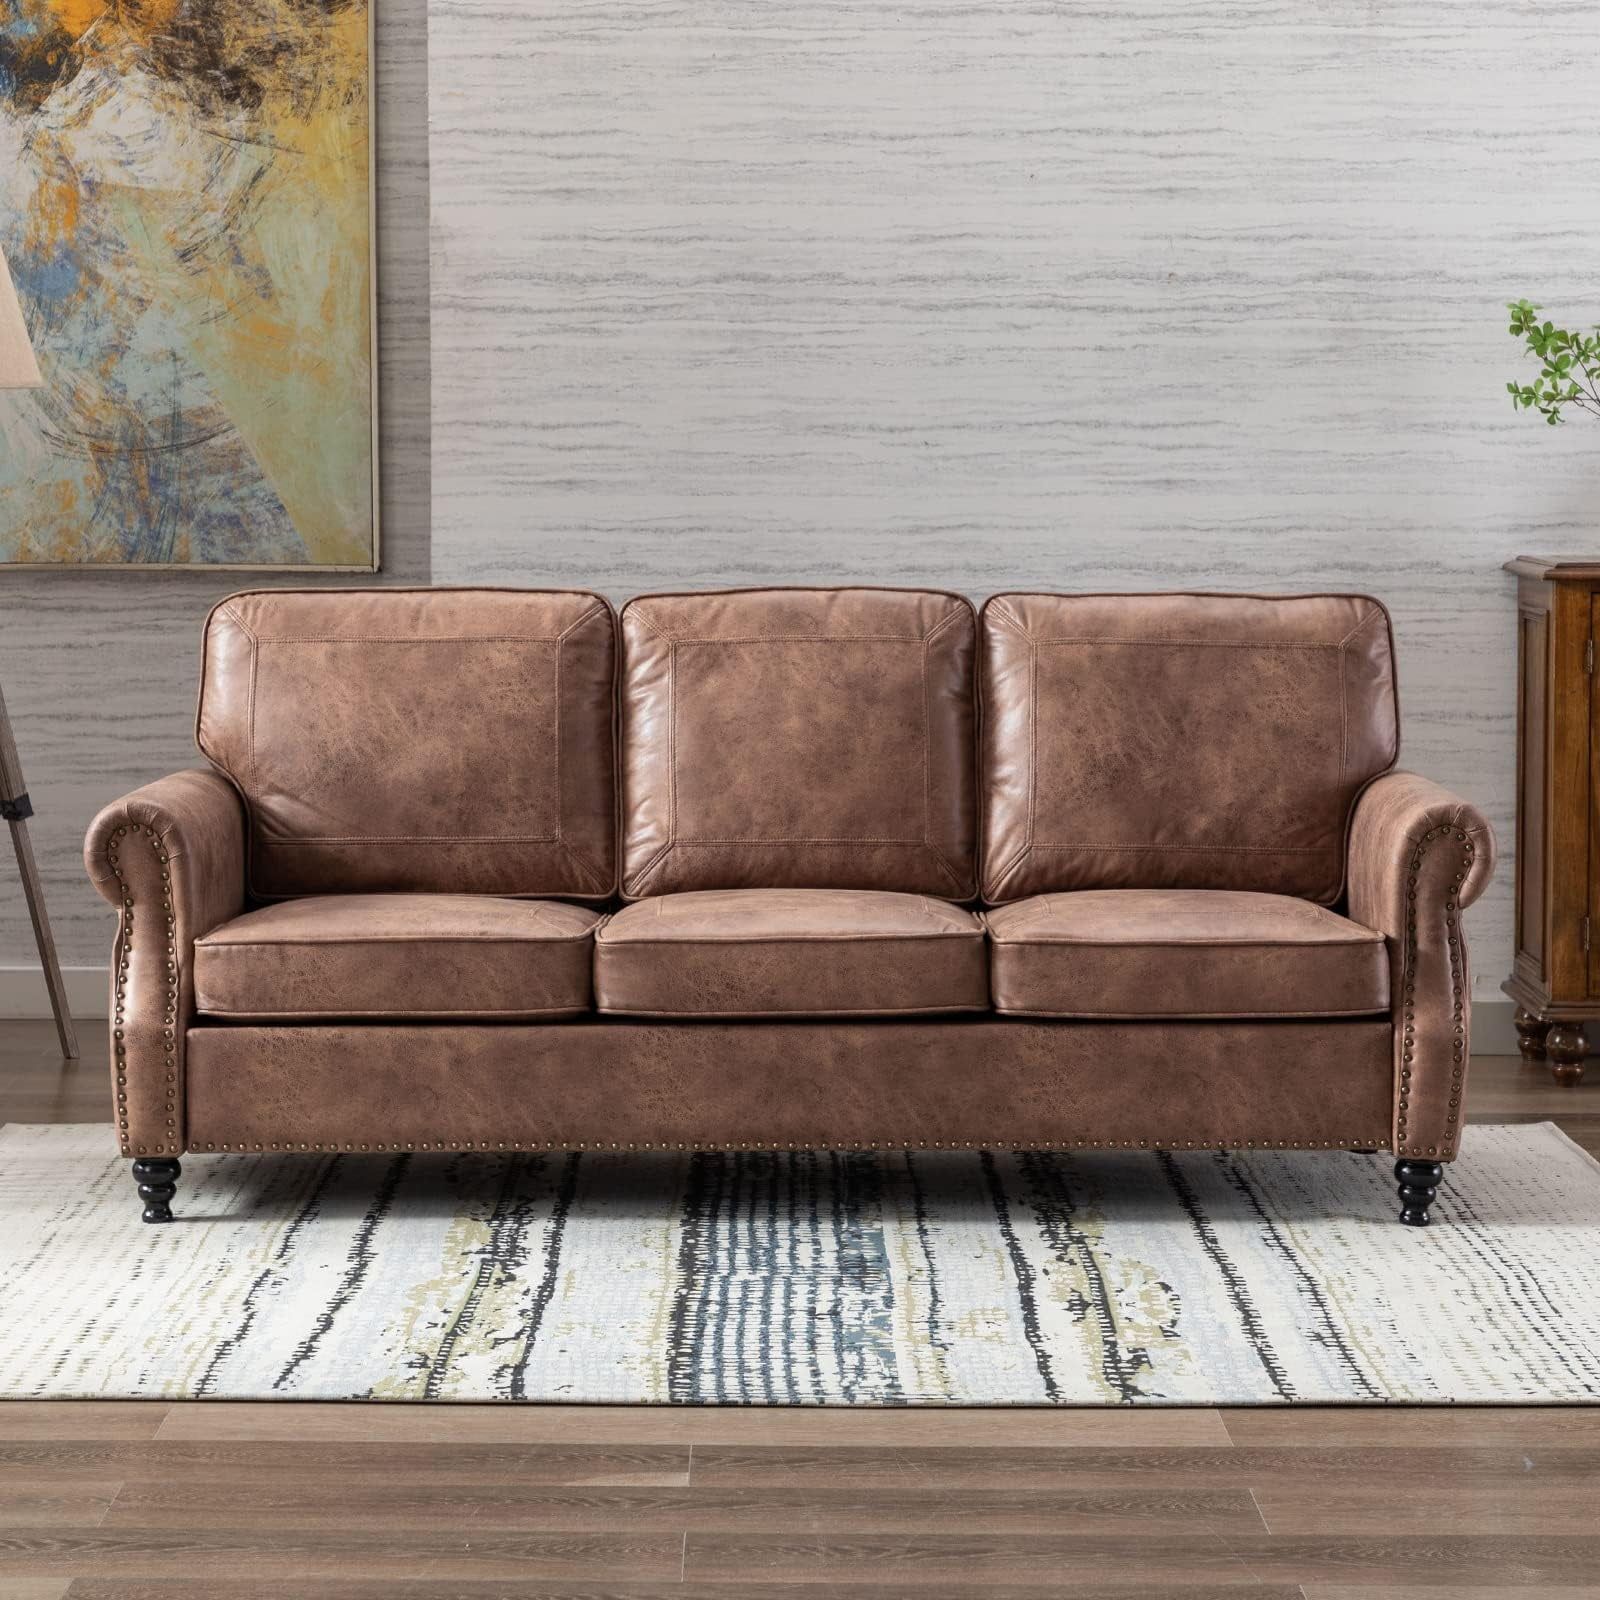 Dreamsir 80" Faux Leather Sofa Couch – Traditional 3 Seater With Nailhead  Trim, Rolled Arms, And Easy Assembly (dark Brown) – Walmart With Regard To Faux Leather Sofas In Chocolate Brown (View 7 of 15)